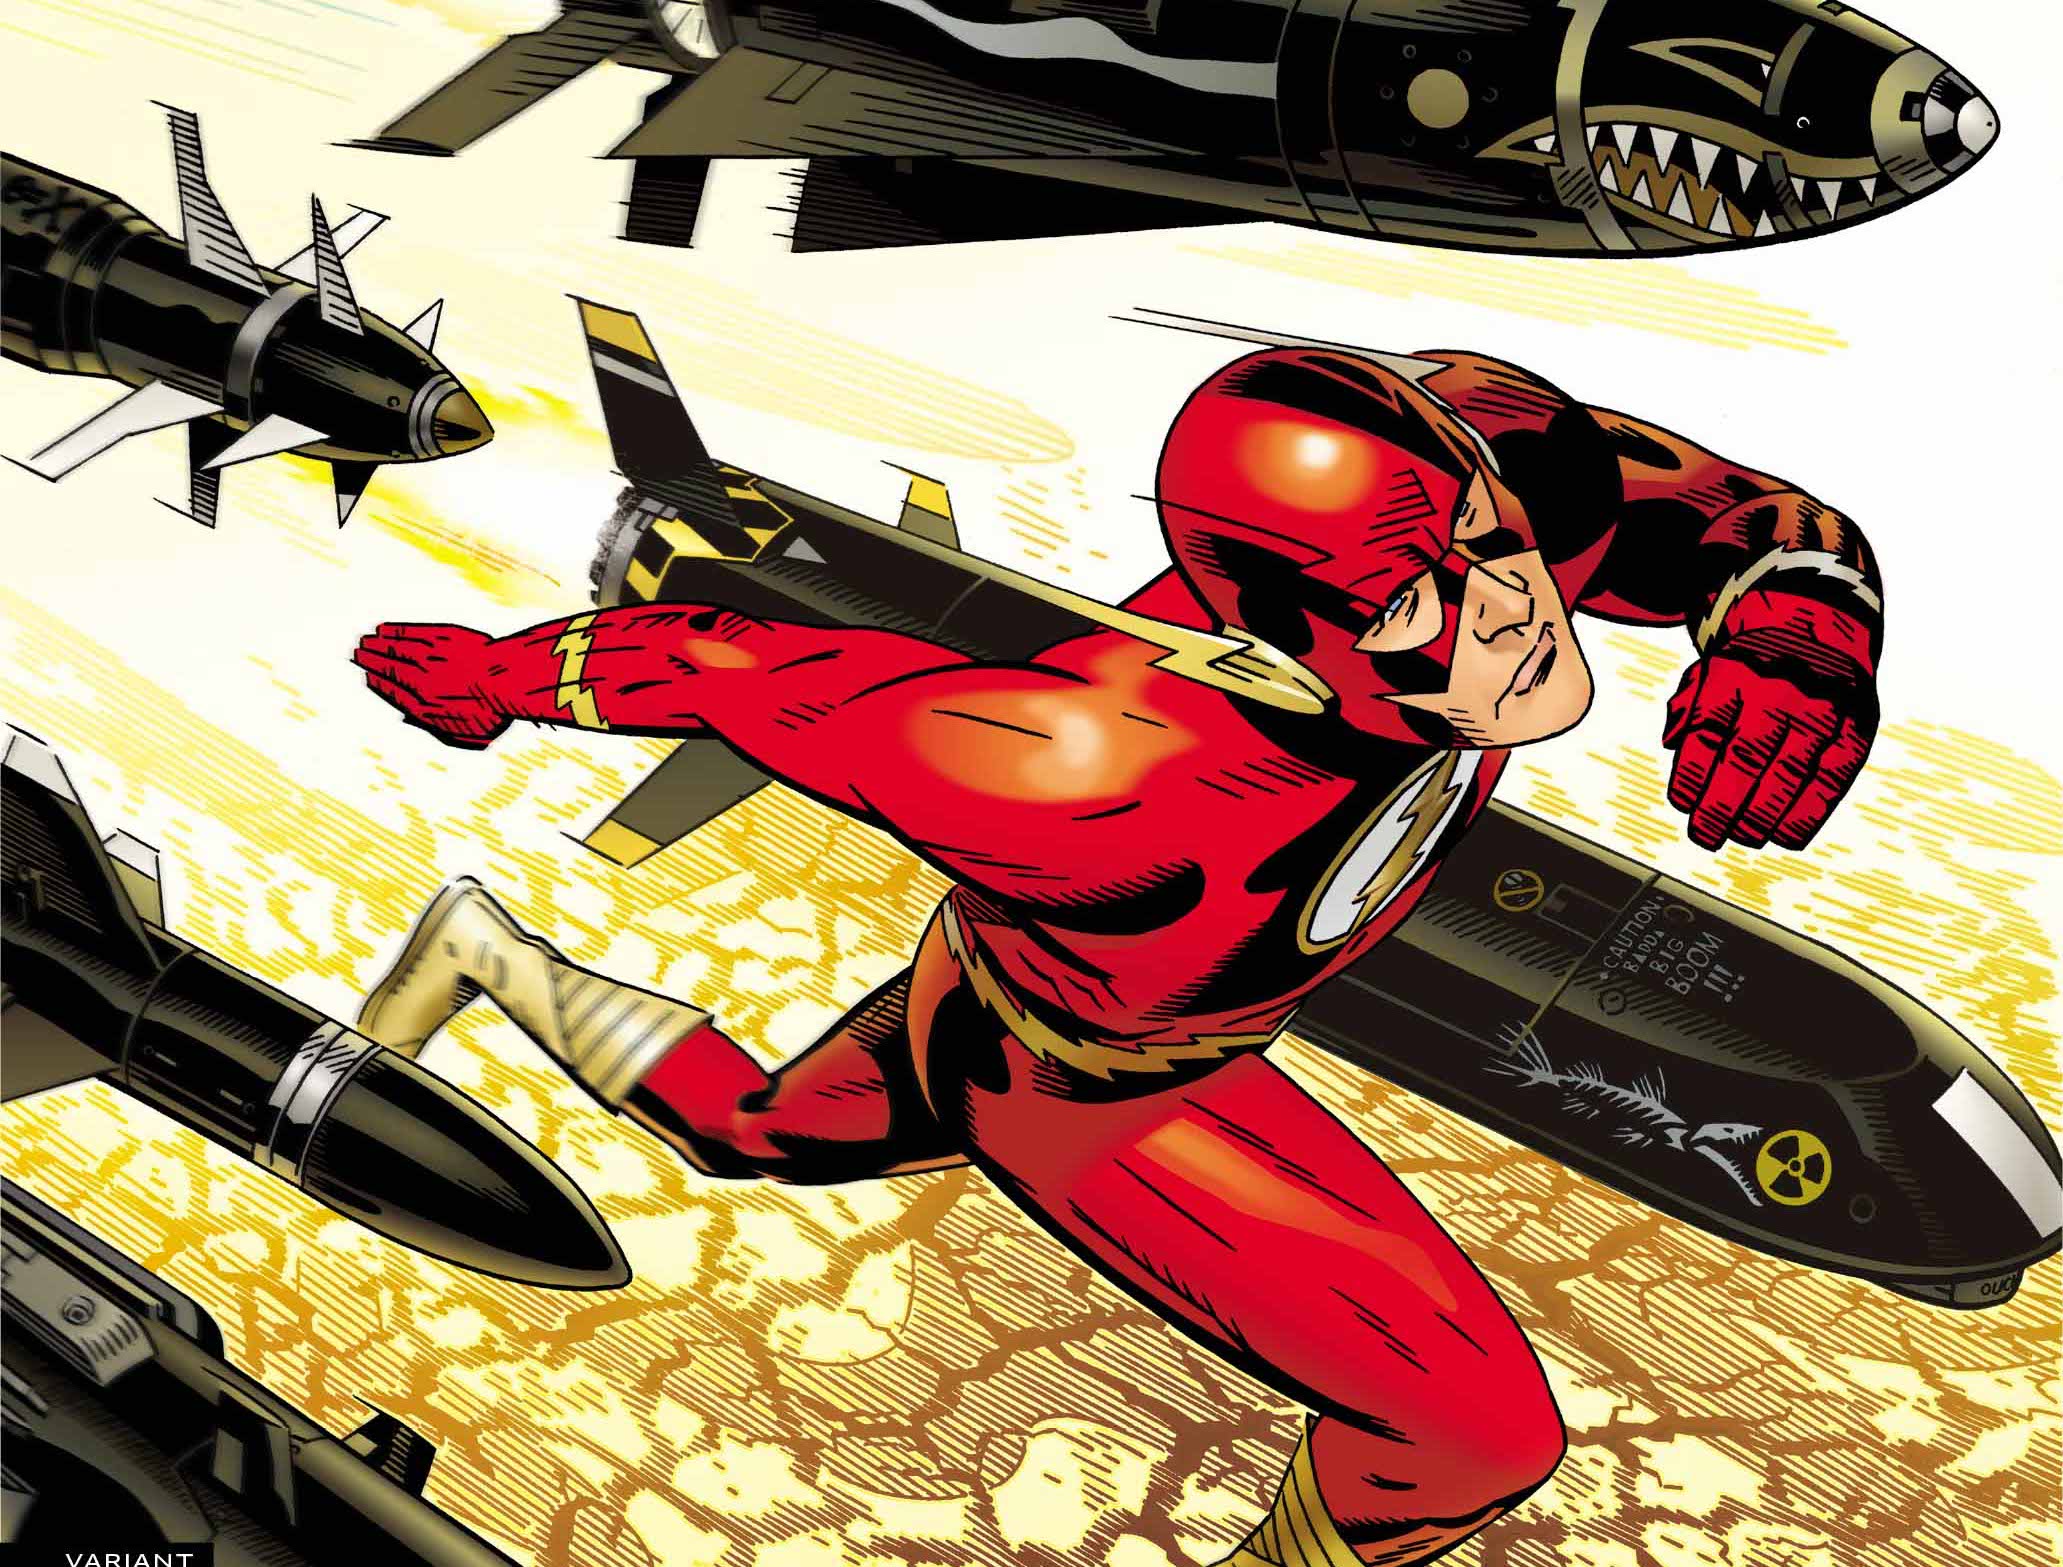 EXCLUSIVE DC Preview: The Flash #65